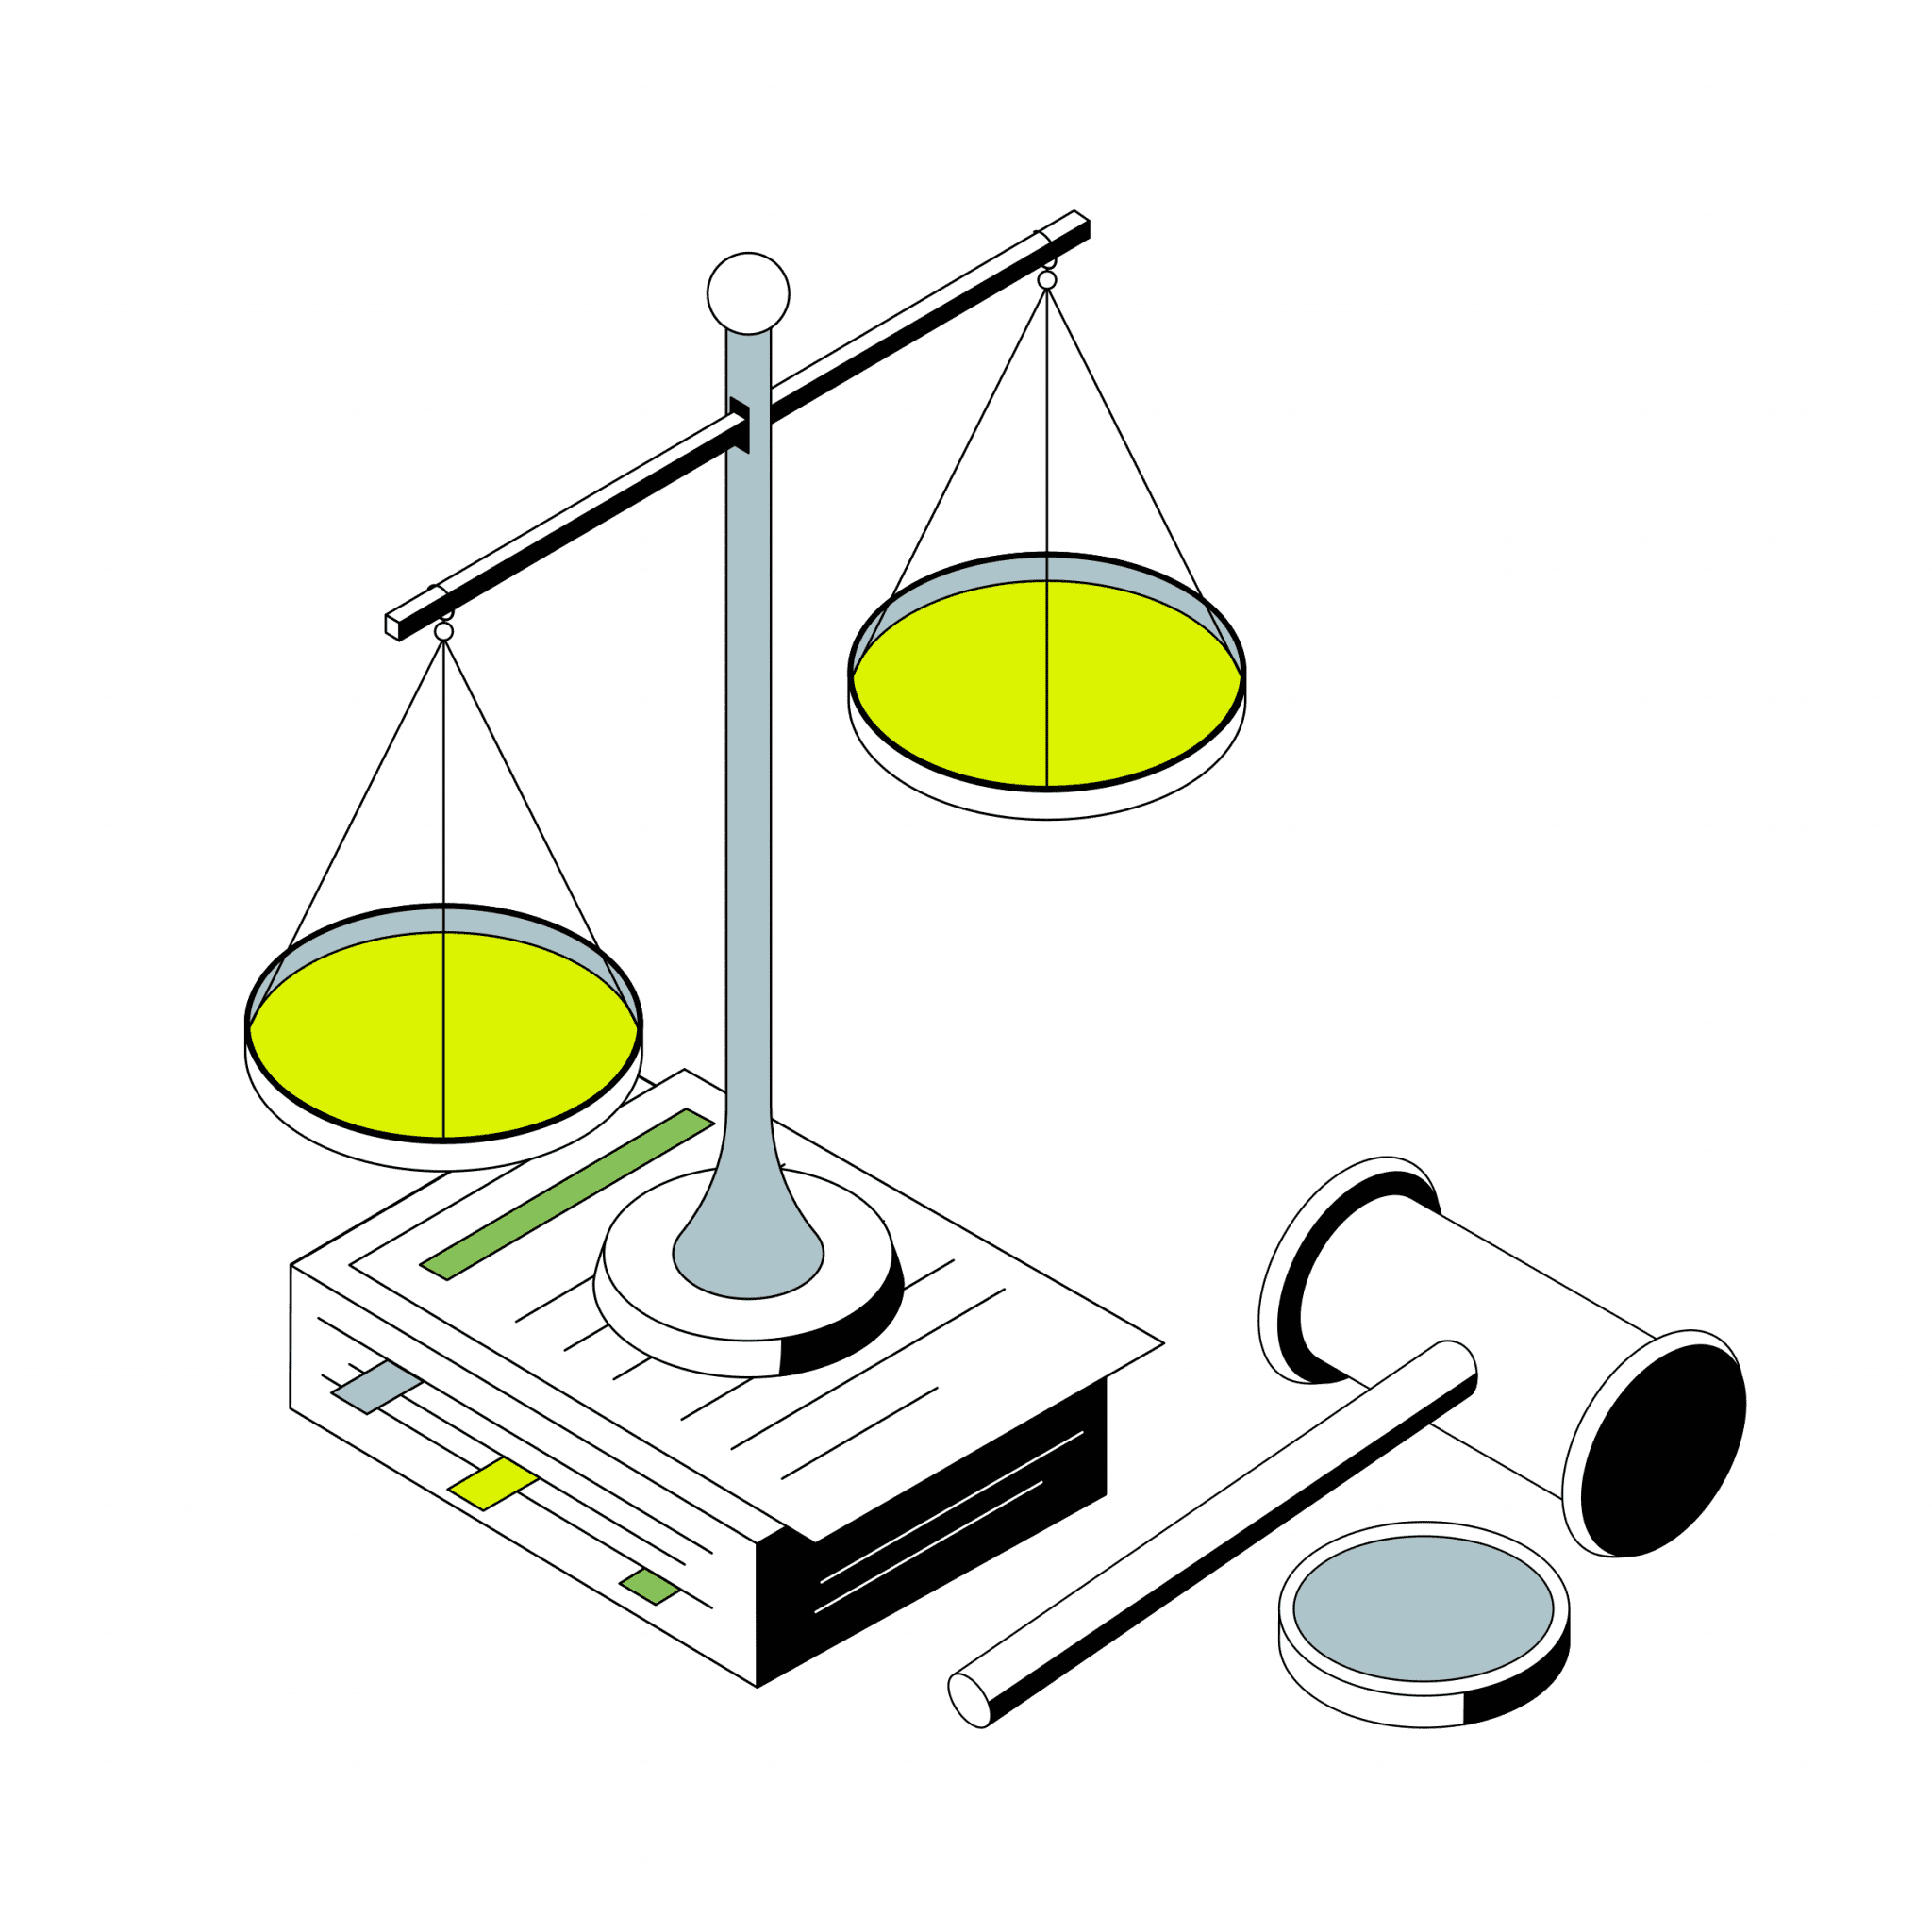 Stylized illustration of legal scales and gavel representing Bylyngo's commitment to precise and equitable legal interpreting services.